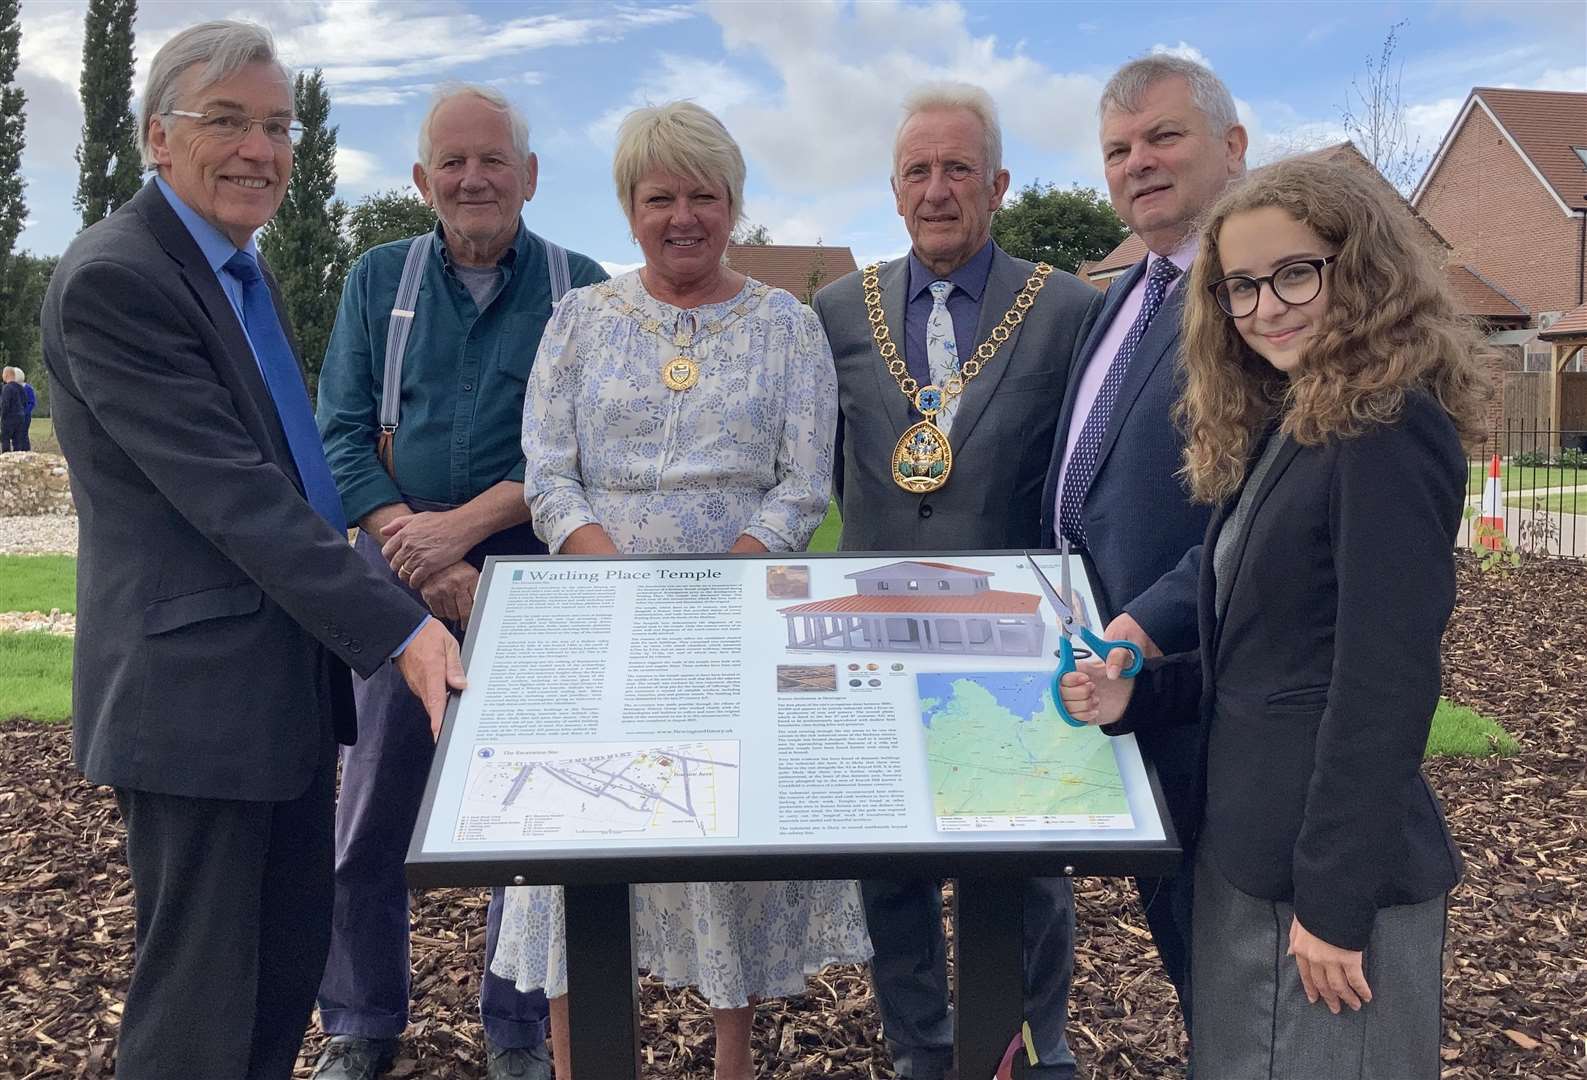 Pupil Ellie Wolfe, 12, cut the ribbon to unveil the recreation of the 2,000-year-old Romano-British temple discovered near her home at Newington, Sittingbourne